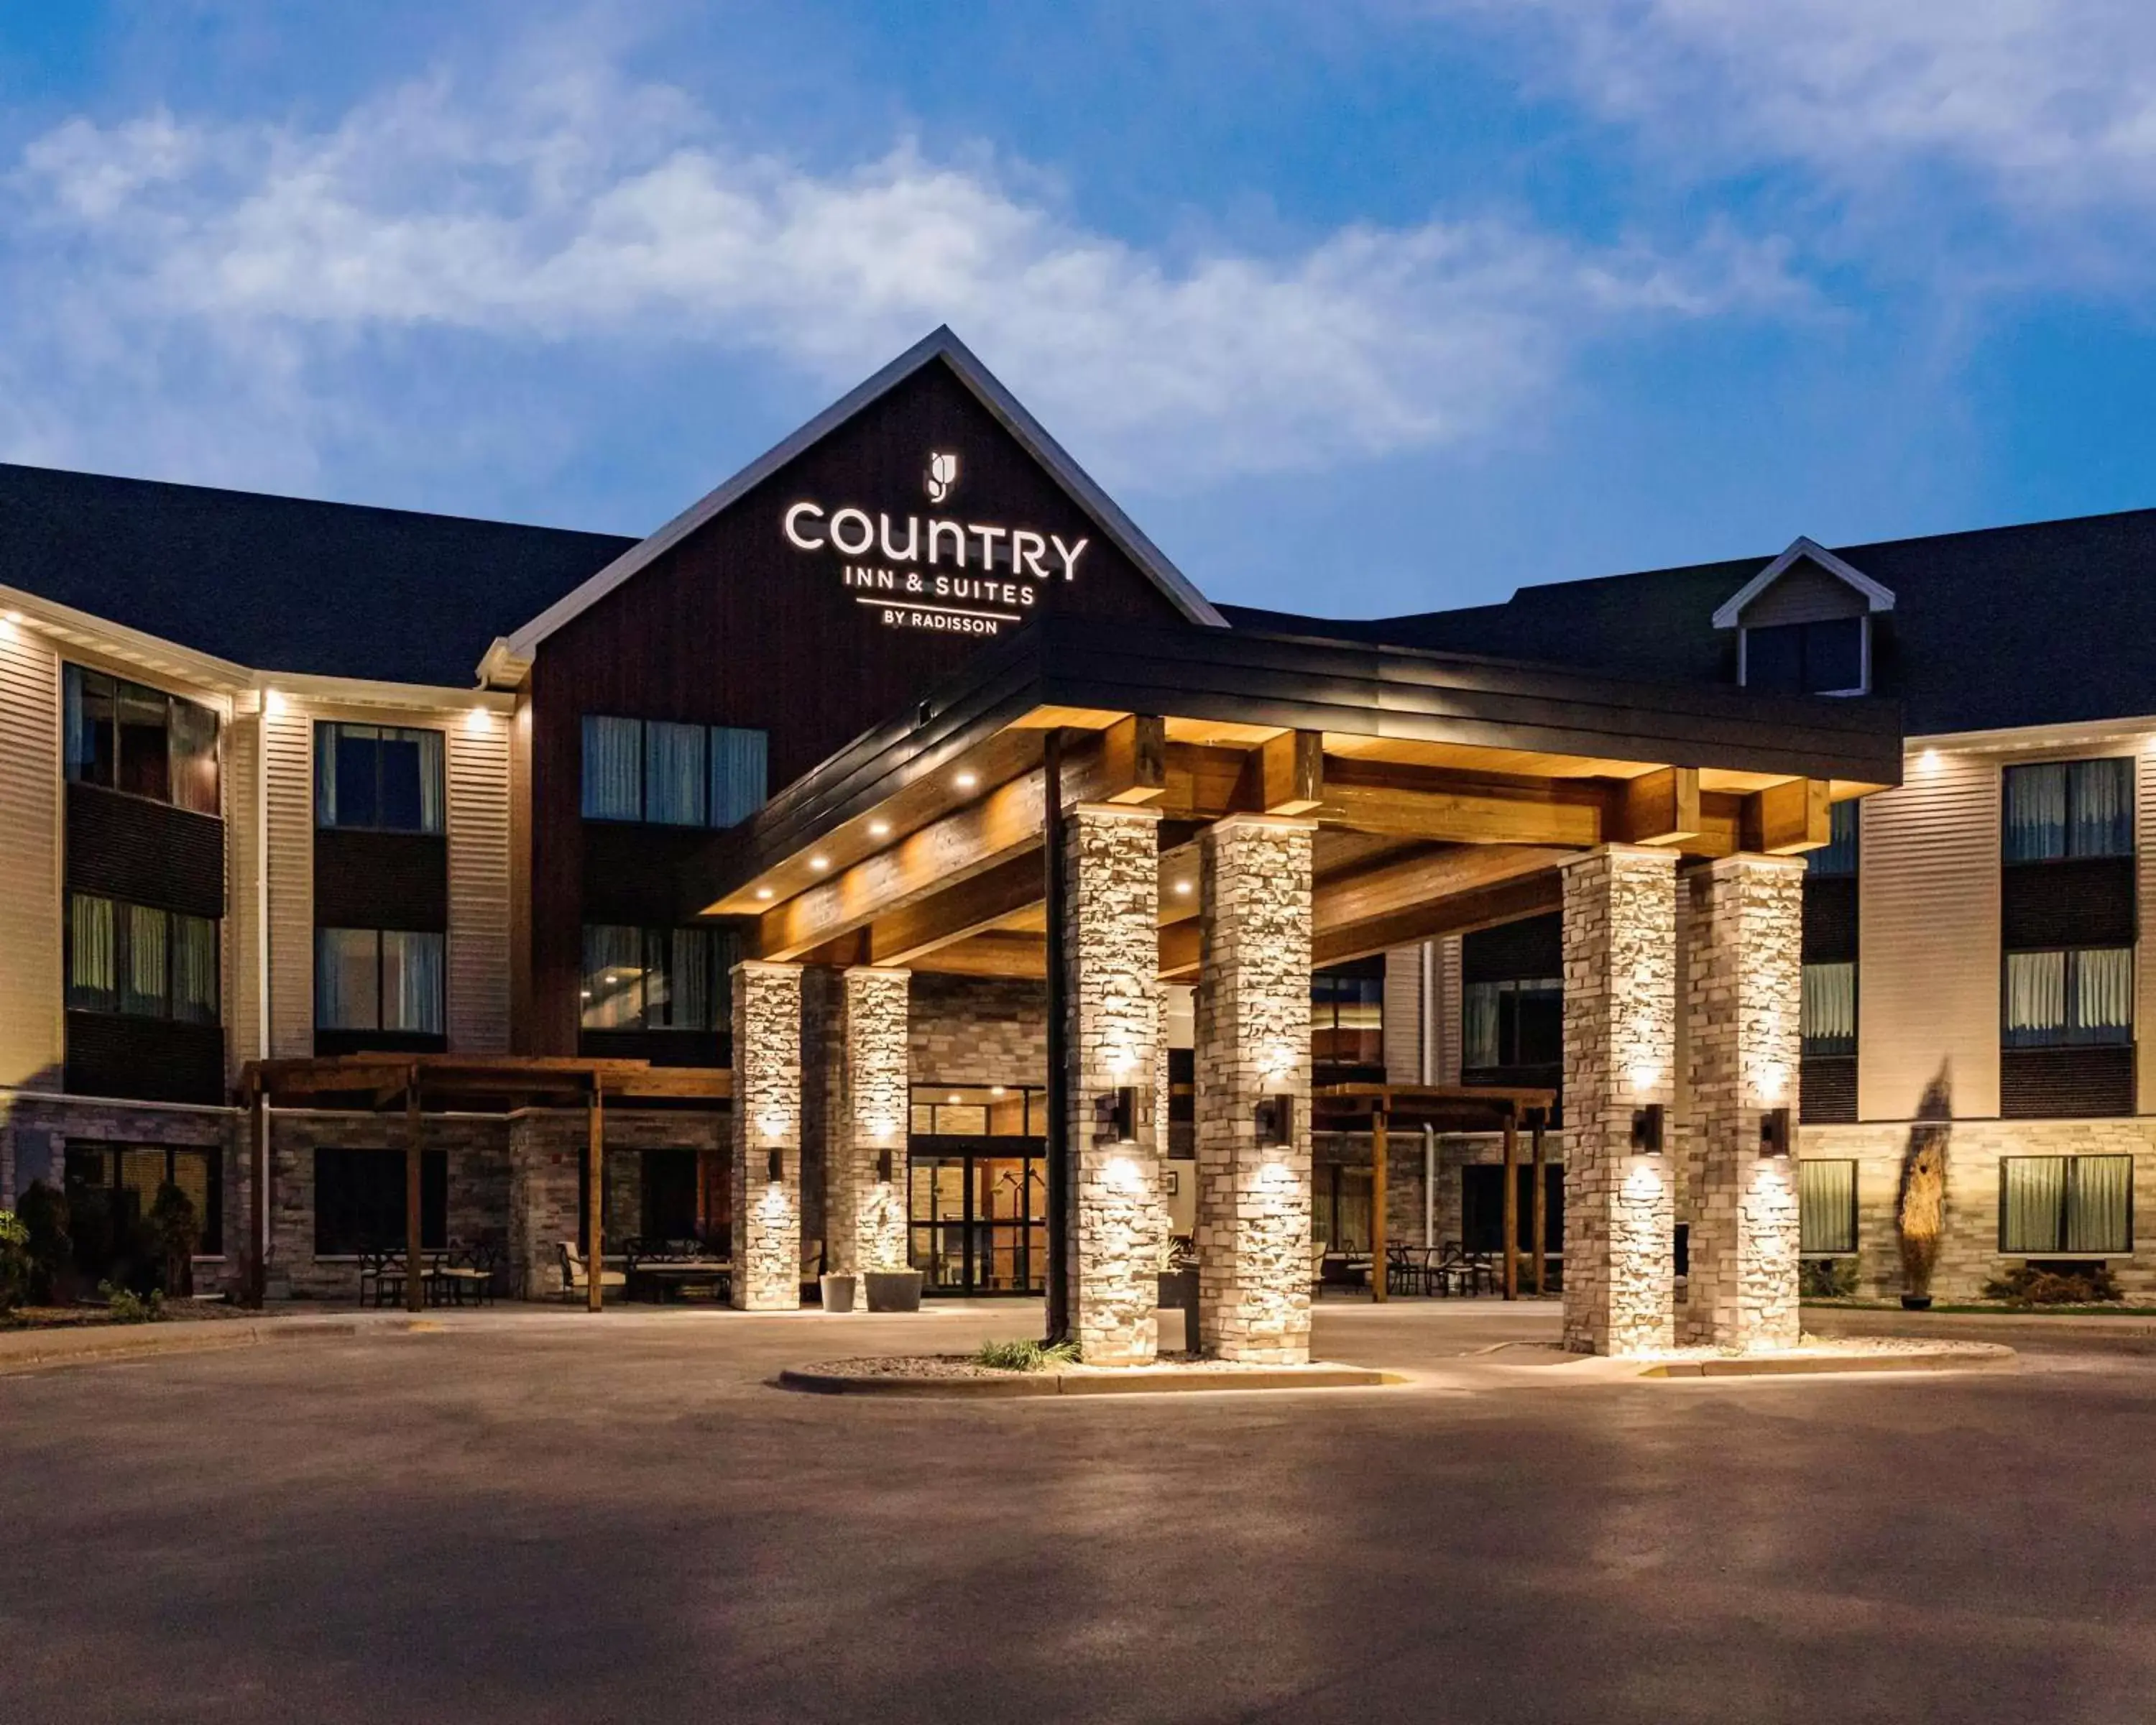 Property building in Country Inn & Suites by Radisson, Appleton, WI